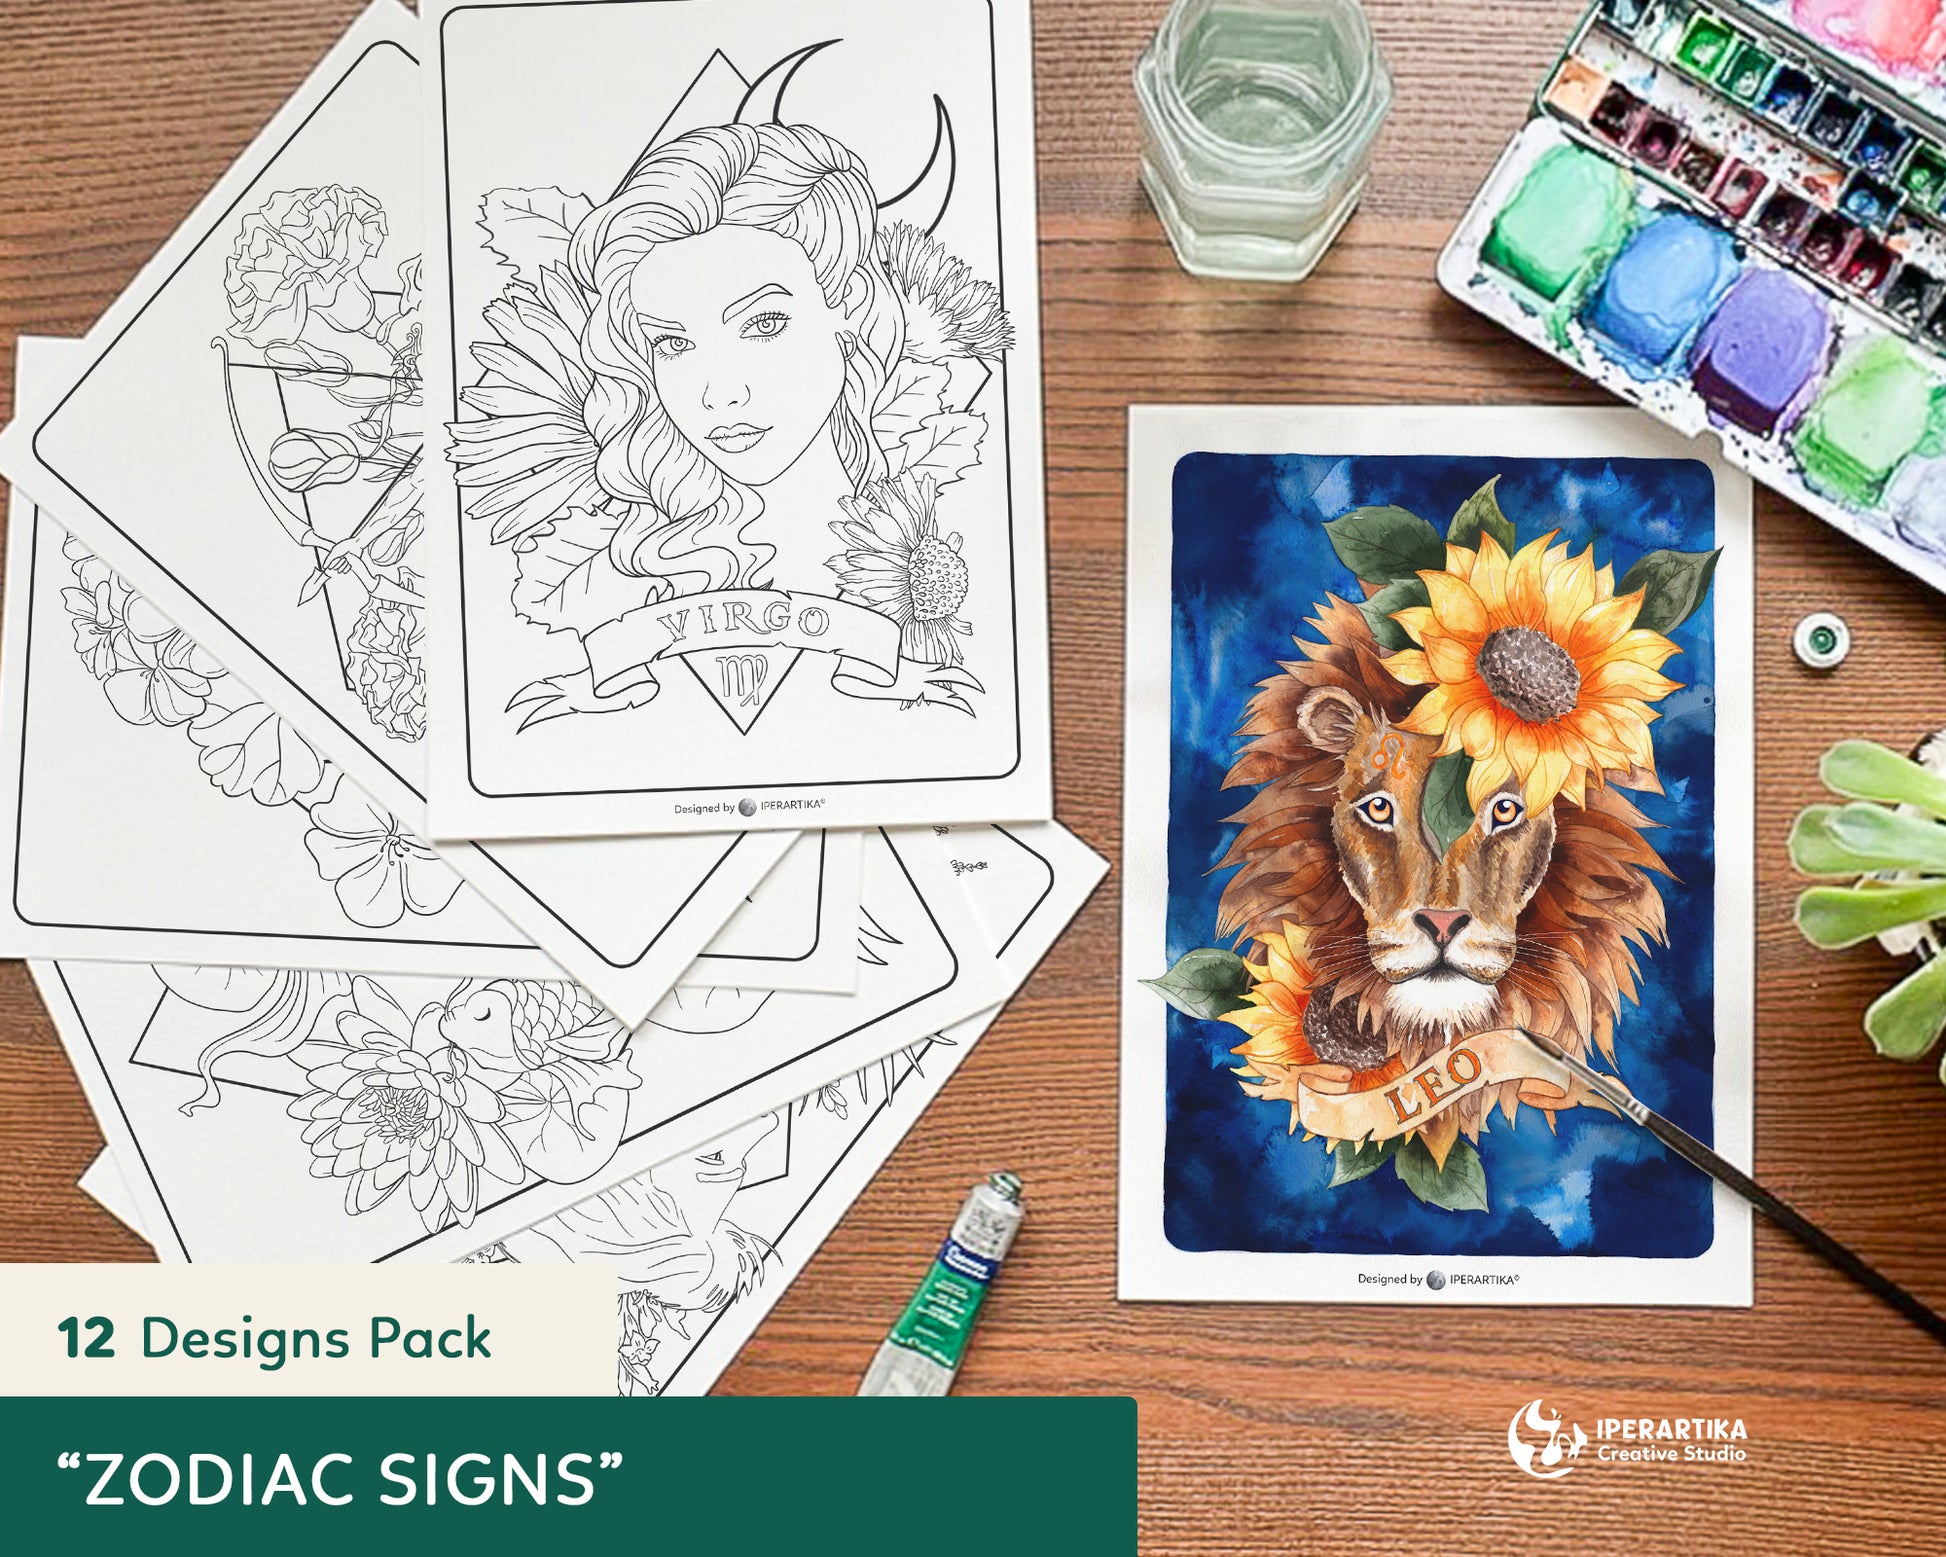 Zodiac signs templates for painting or coloring. Designs ideal to trace on watercolor paper or mixed media paper. Templates for painting.watercolor easy projects. Iperartika templates